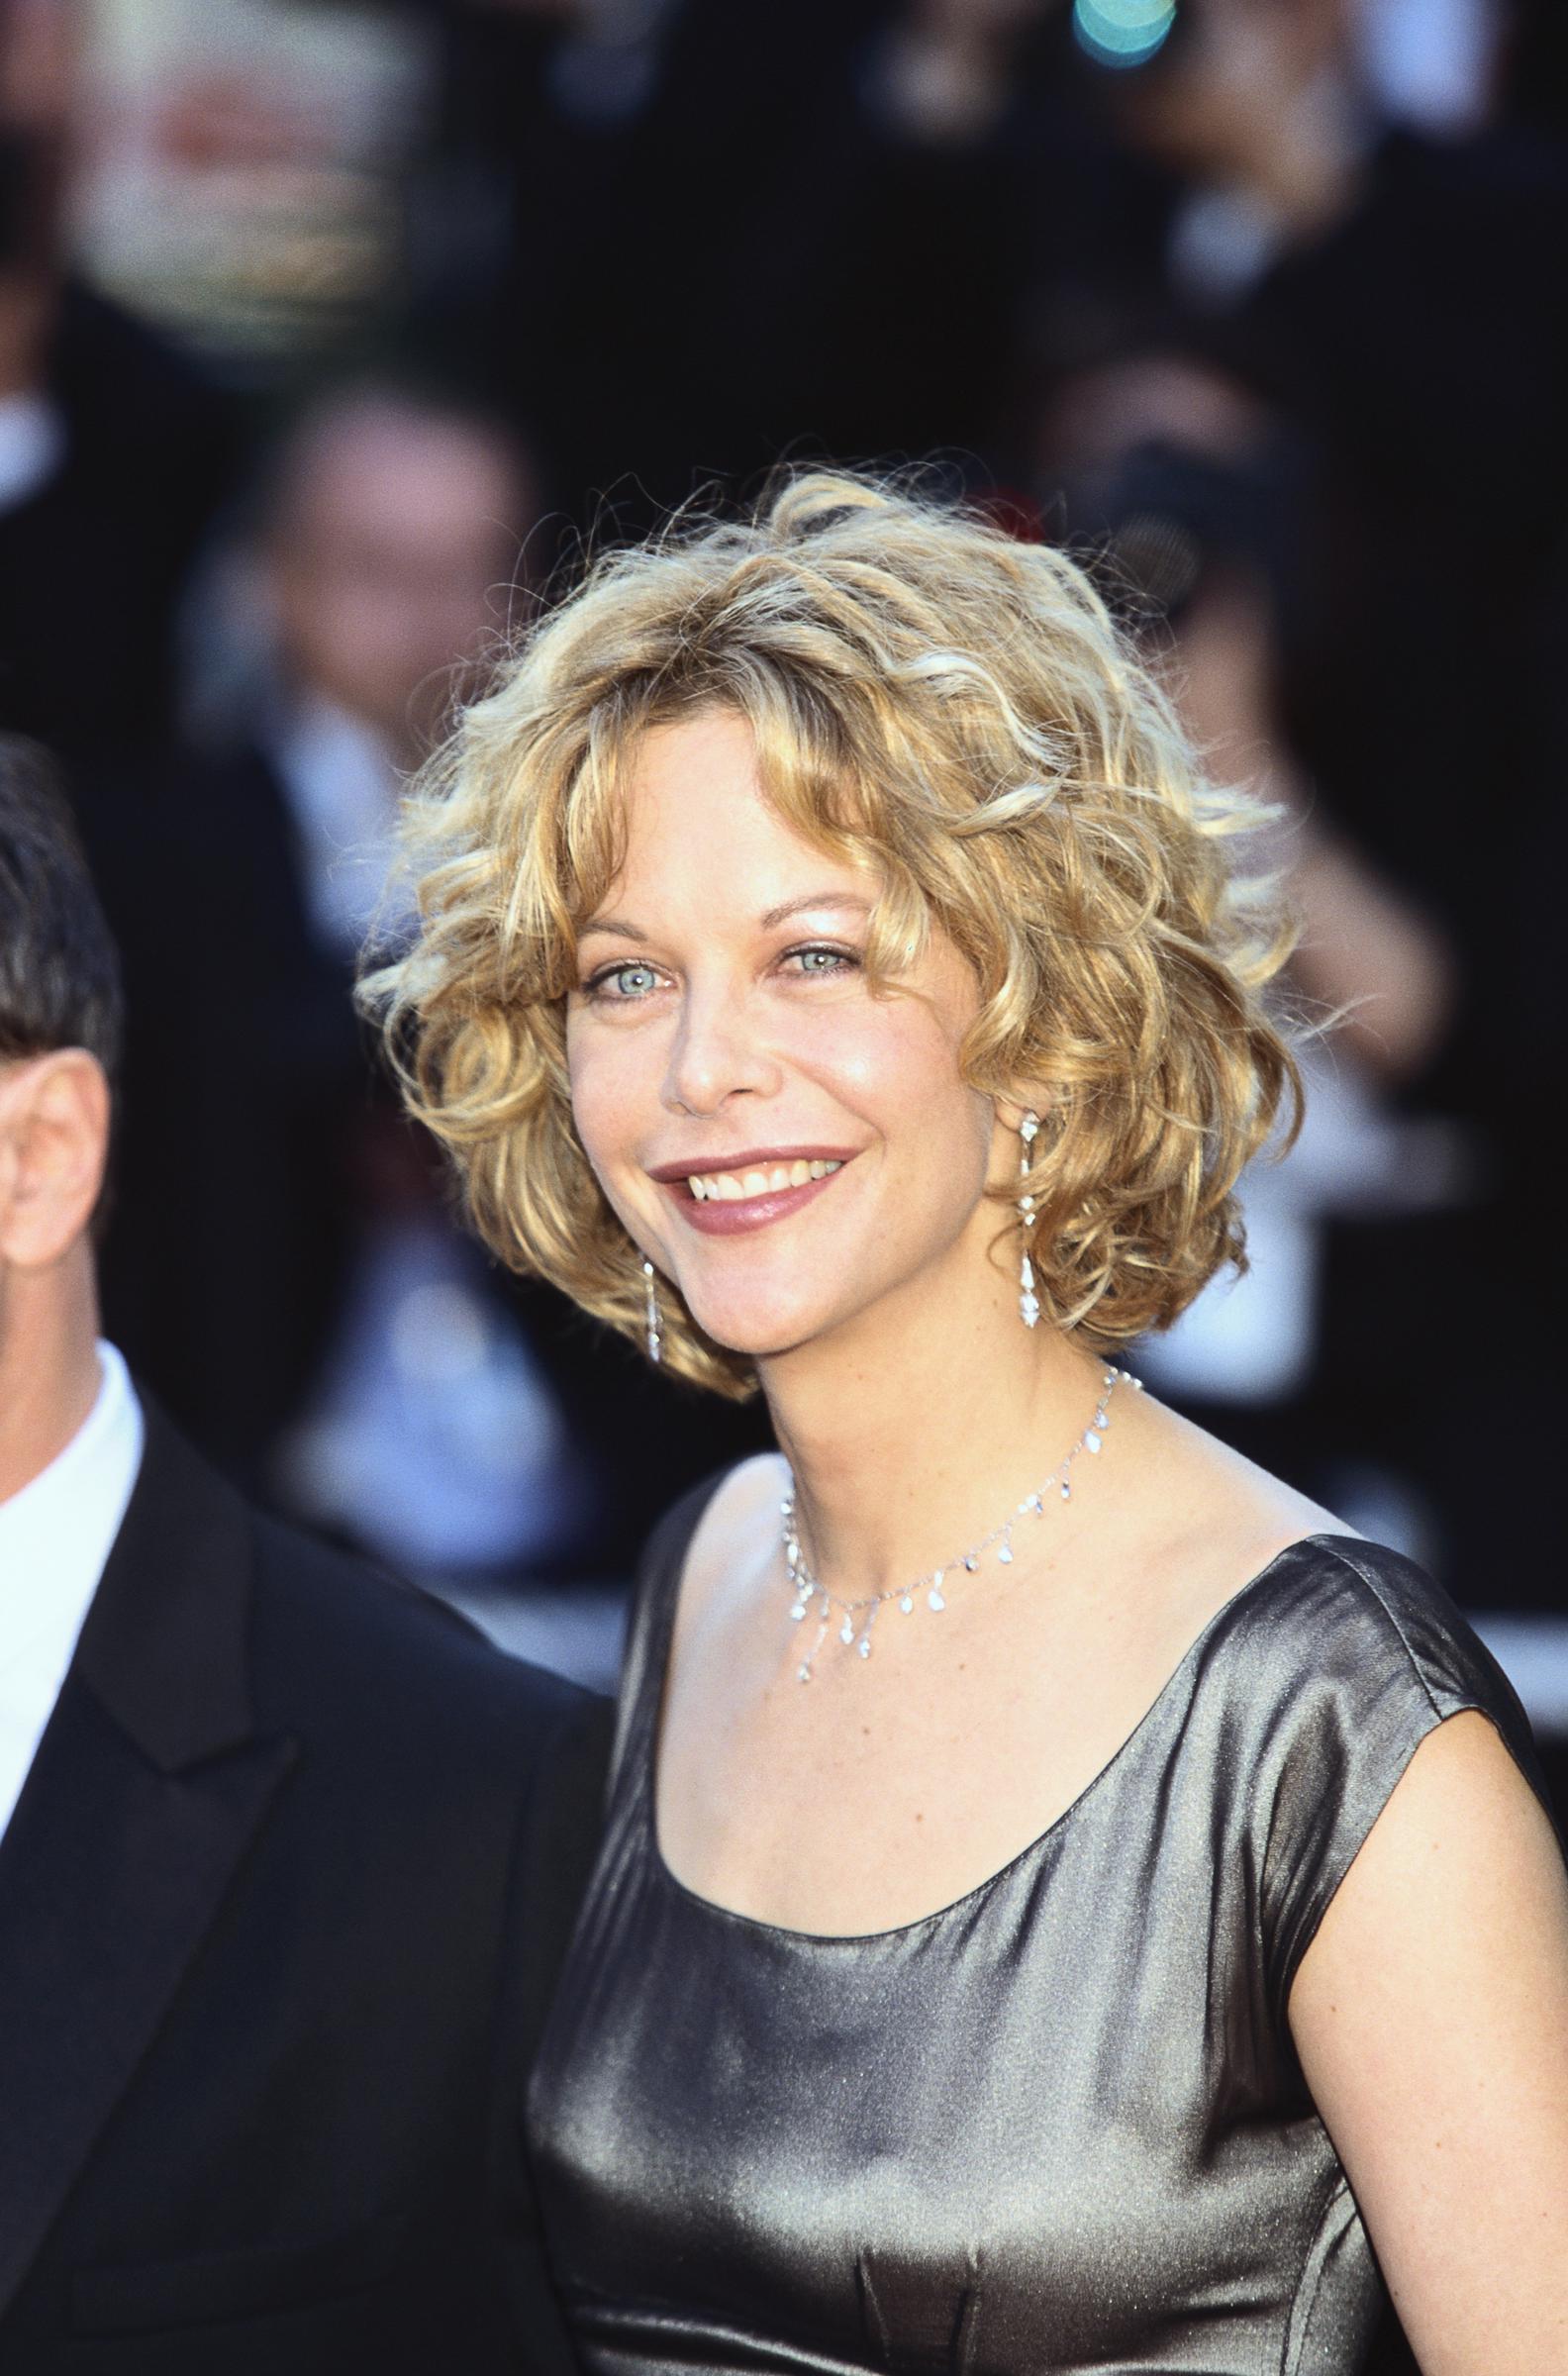 Meg Ryan at the 56th International Film Festival on May 1, 2003 in Cannes. | Source: Getty Images